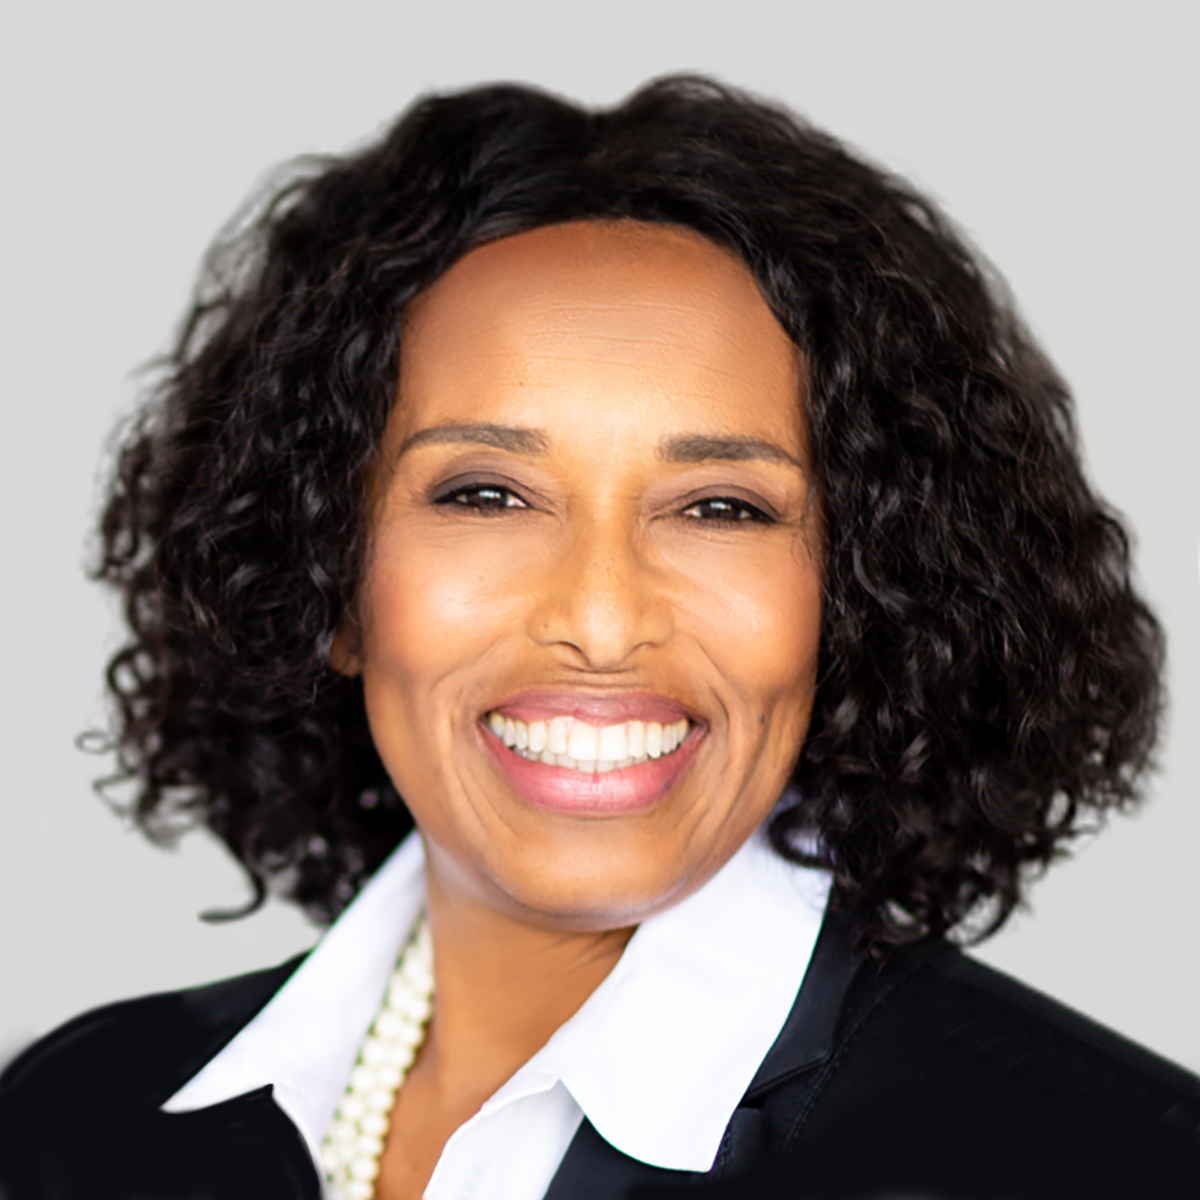 Grocery Outlet Holding Corp. Announces the Appointment of Gail Moody ...